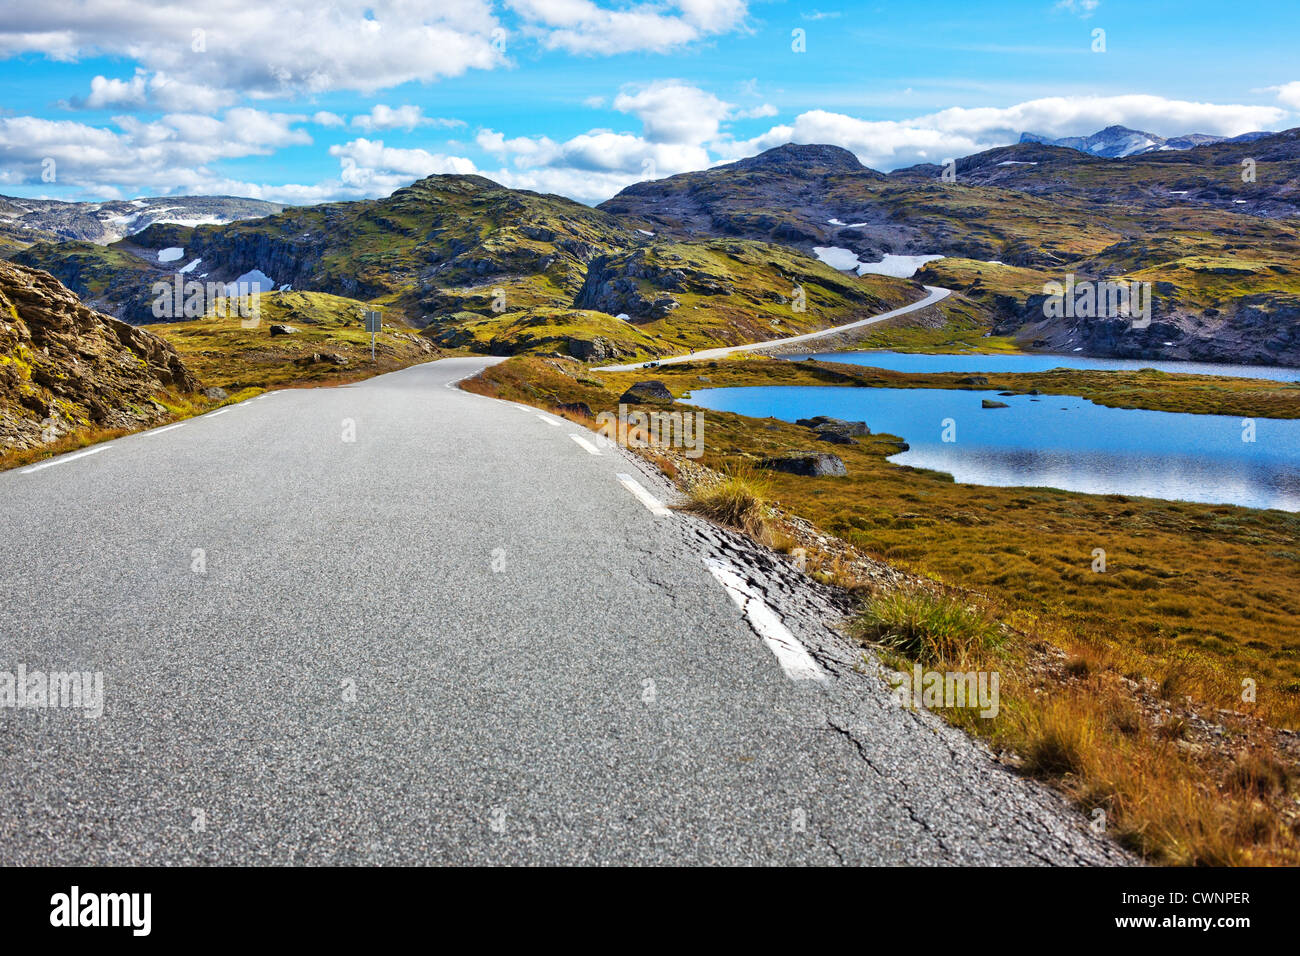 Norway road landscape on high mountains. Stock Photo